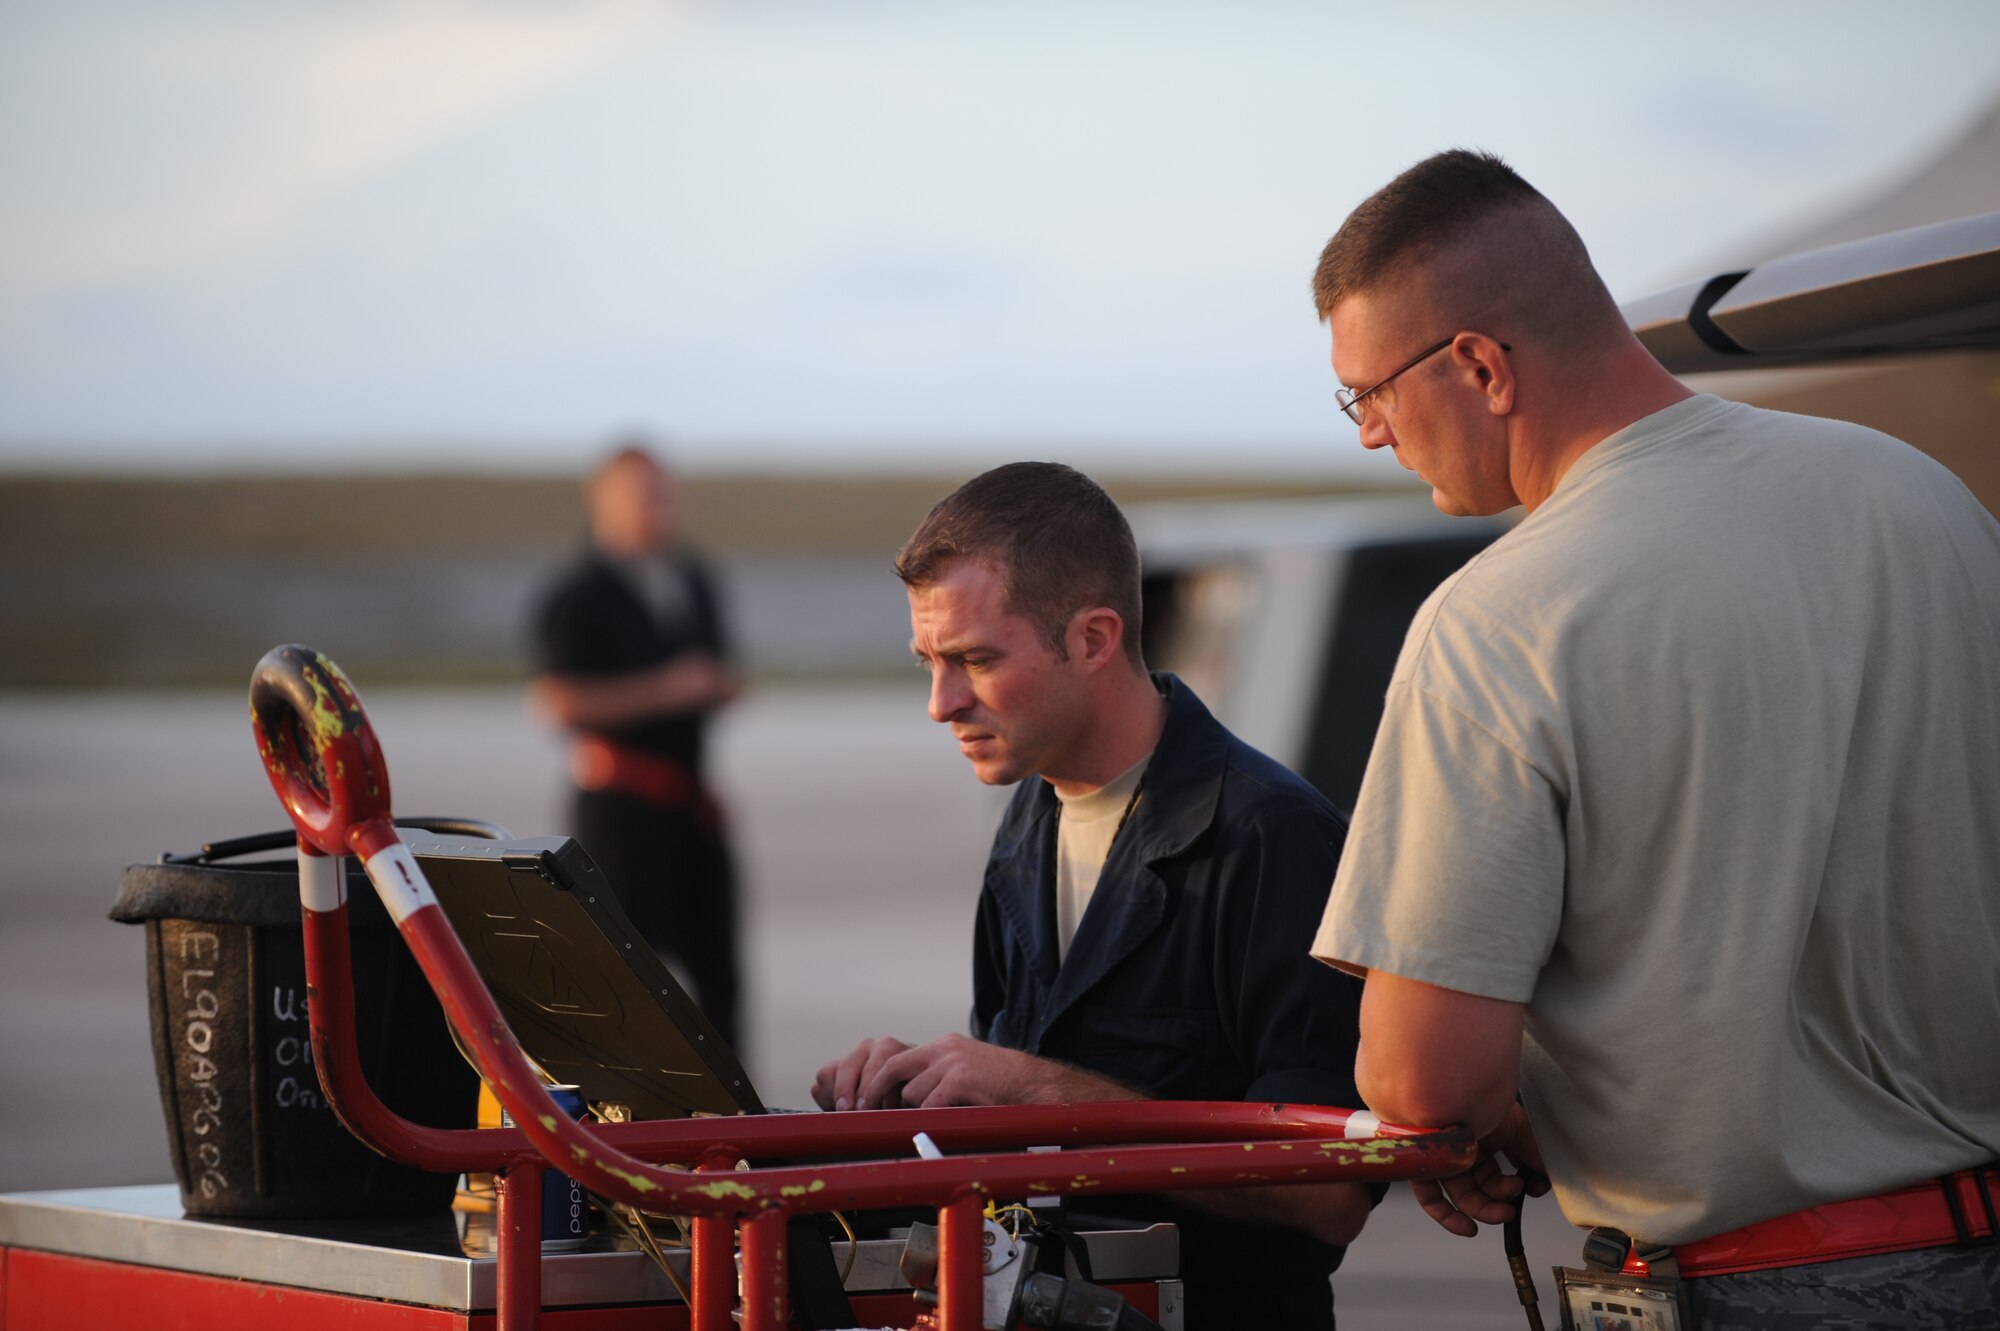 (background) Airman 1st Class Matt Porter inspects an F-22 Raptor while crew chiefs Staff Sgt. Chad Konyndyk and Airman 1st Class Michael Biggs, 36th Expeditionary Maintenance Squadron review F-22 technical data April 15 at Andersen Air Force Base, Guam.  The 90th Fighter Squadron from Elmendorf Air Force Base, Alaska just completed a 3-month deployment to Andersen Air Force Base, Guam as part of a theater security package. The stealth-fighters, along with associated maintenance and support personnel participated in various exercises that provided routine training in an environment different from their home station. The F-22 is a highly maneuverable combat aircraft that can avoid enemy detection, cruise at supersonic speeds, and provide the joint force commander an unprecedented level of integrated situational awareness.(U.S. Air Force photo/ Master Sgt. Kevin J. Gruenwald) released